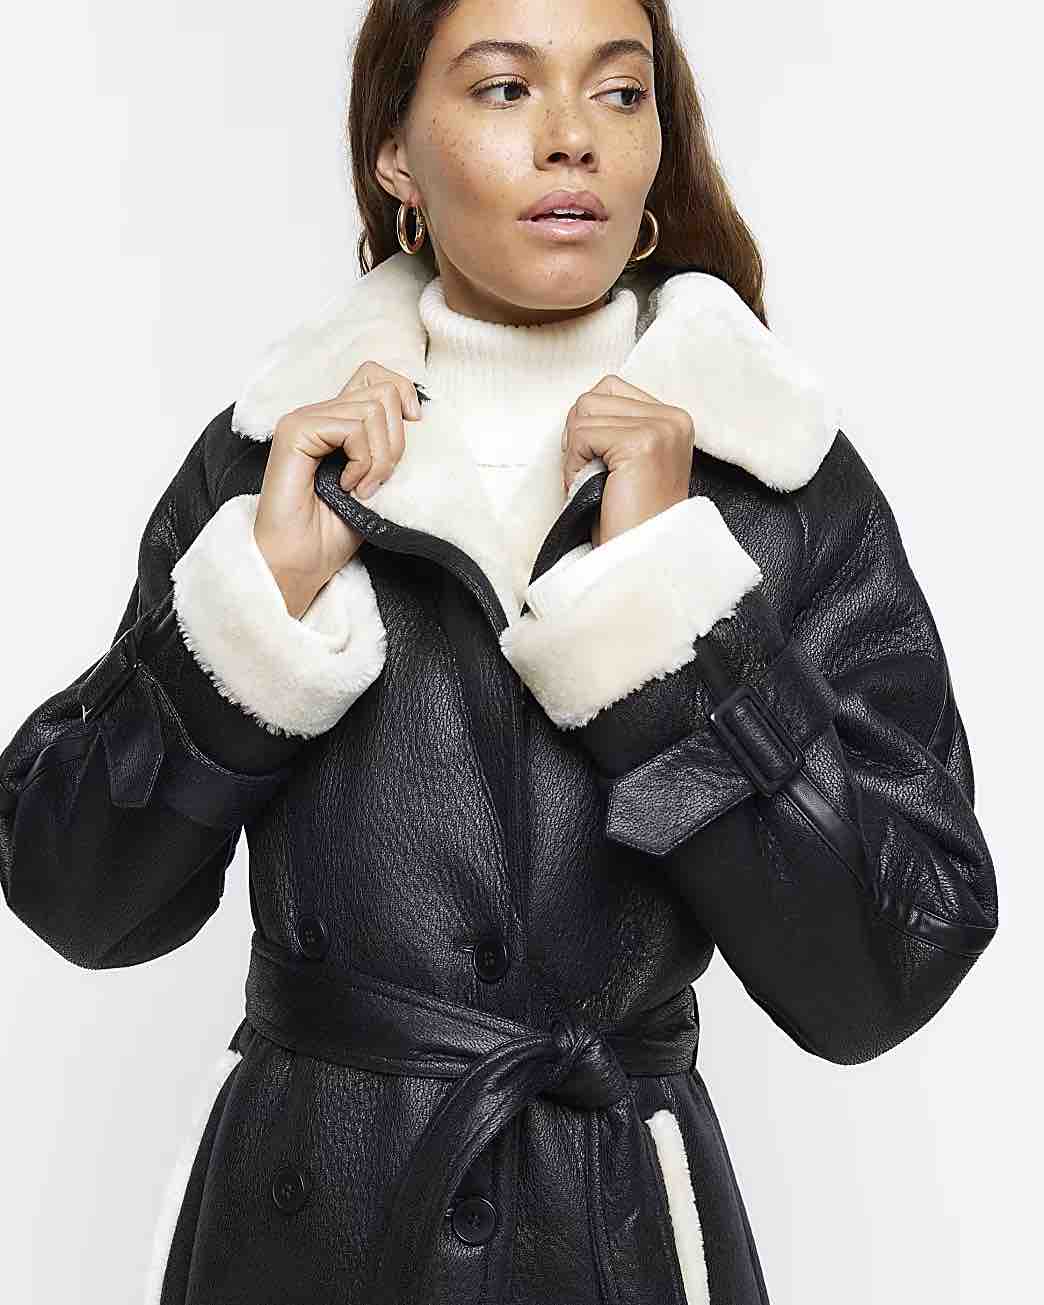 Five Things We Are Loving At River Island Belted Shearling Trench Coat affordable winter coat what to buy for winter must have winter pieces affordable winter outerwear trendy jackets for winter must have jacket for the winter season